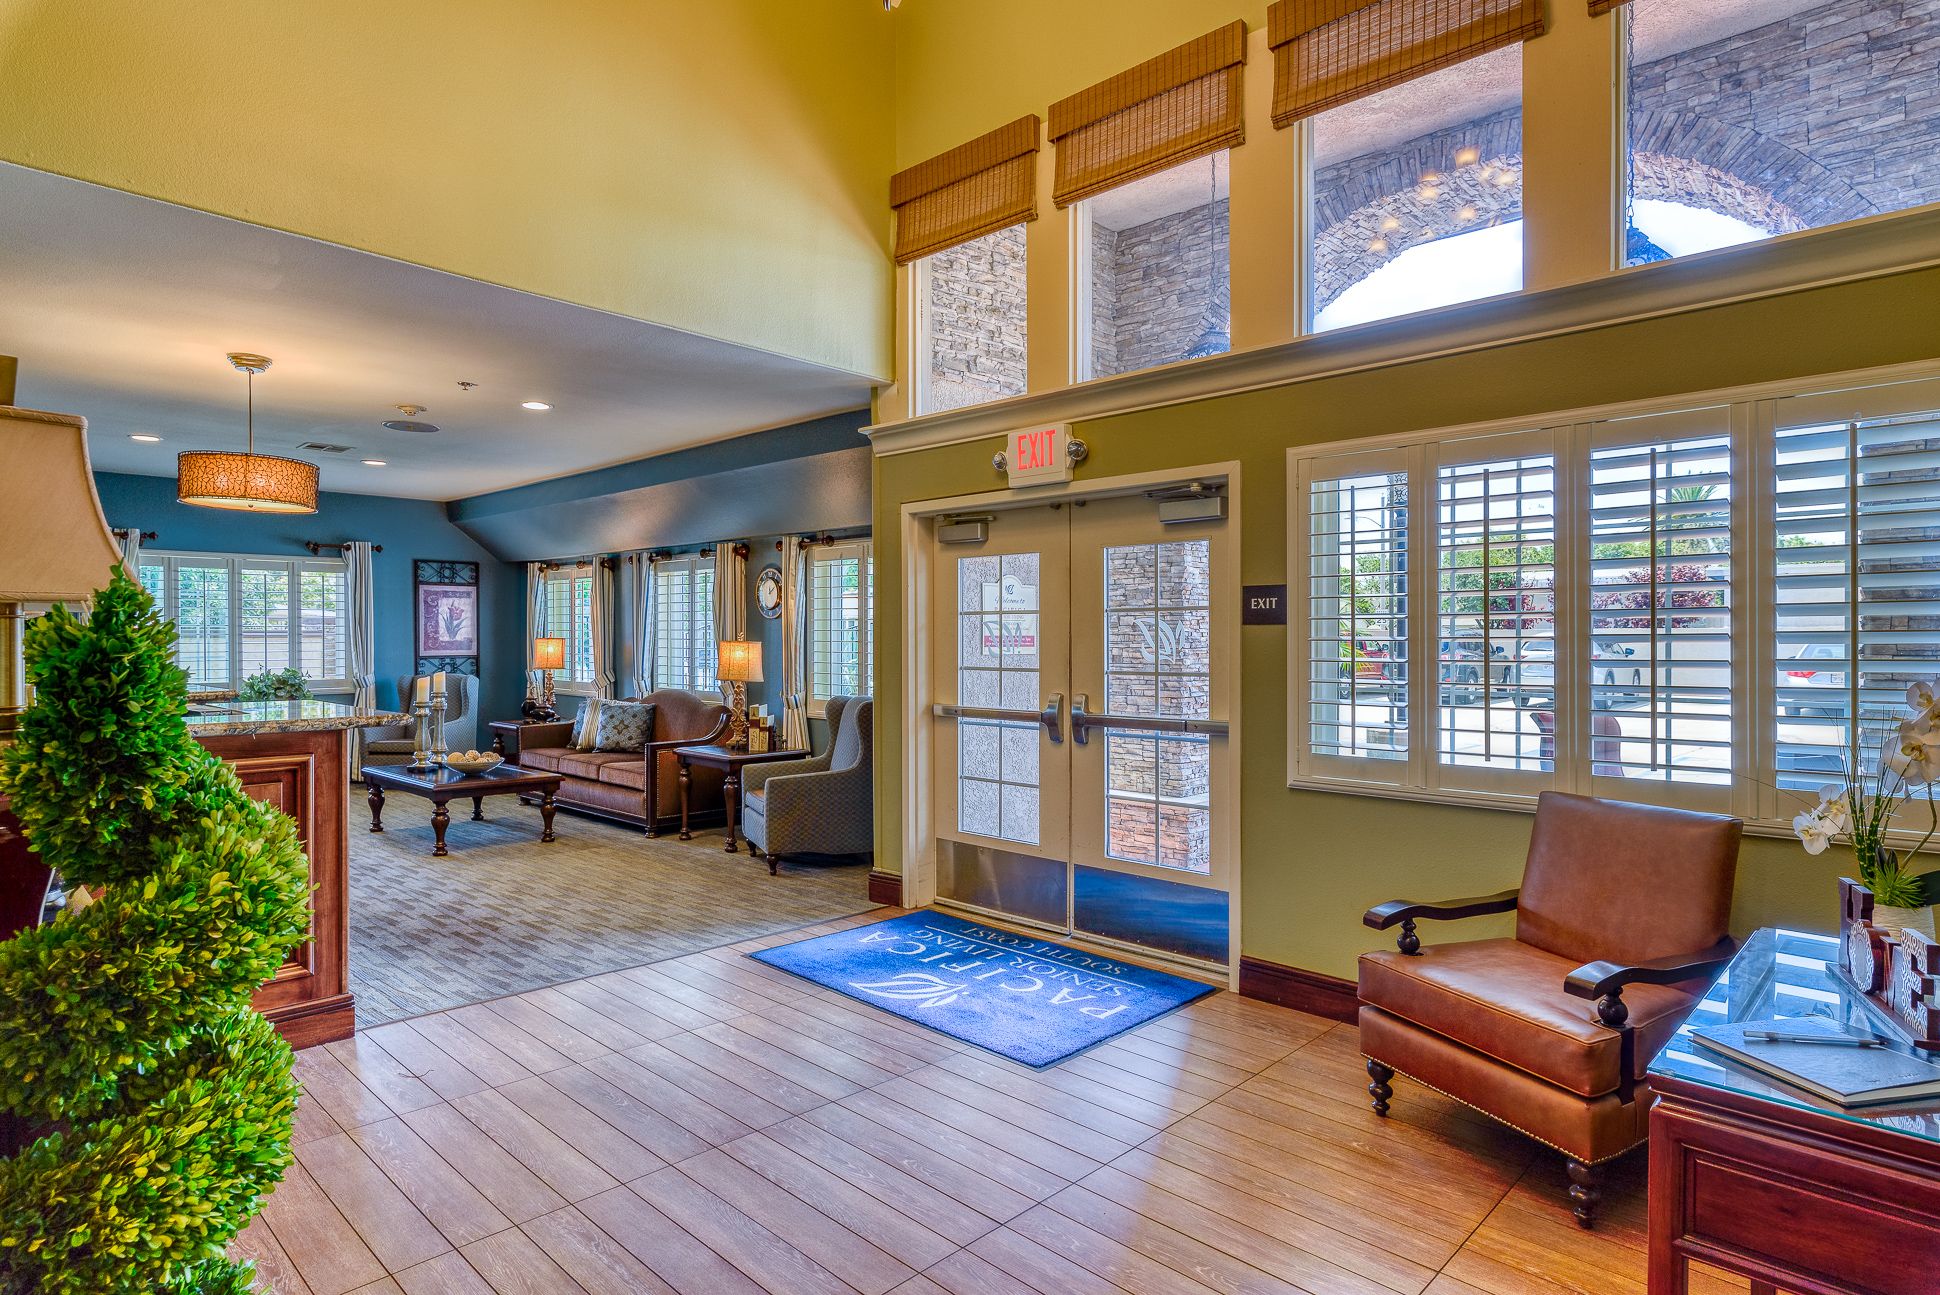 Interior view of Pacifica Senior Living South Coast with hardwood floors, furniture, and decor.